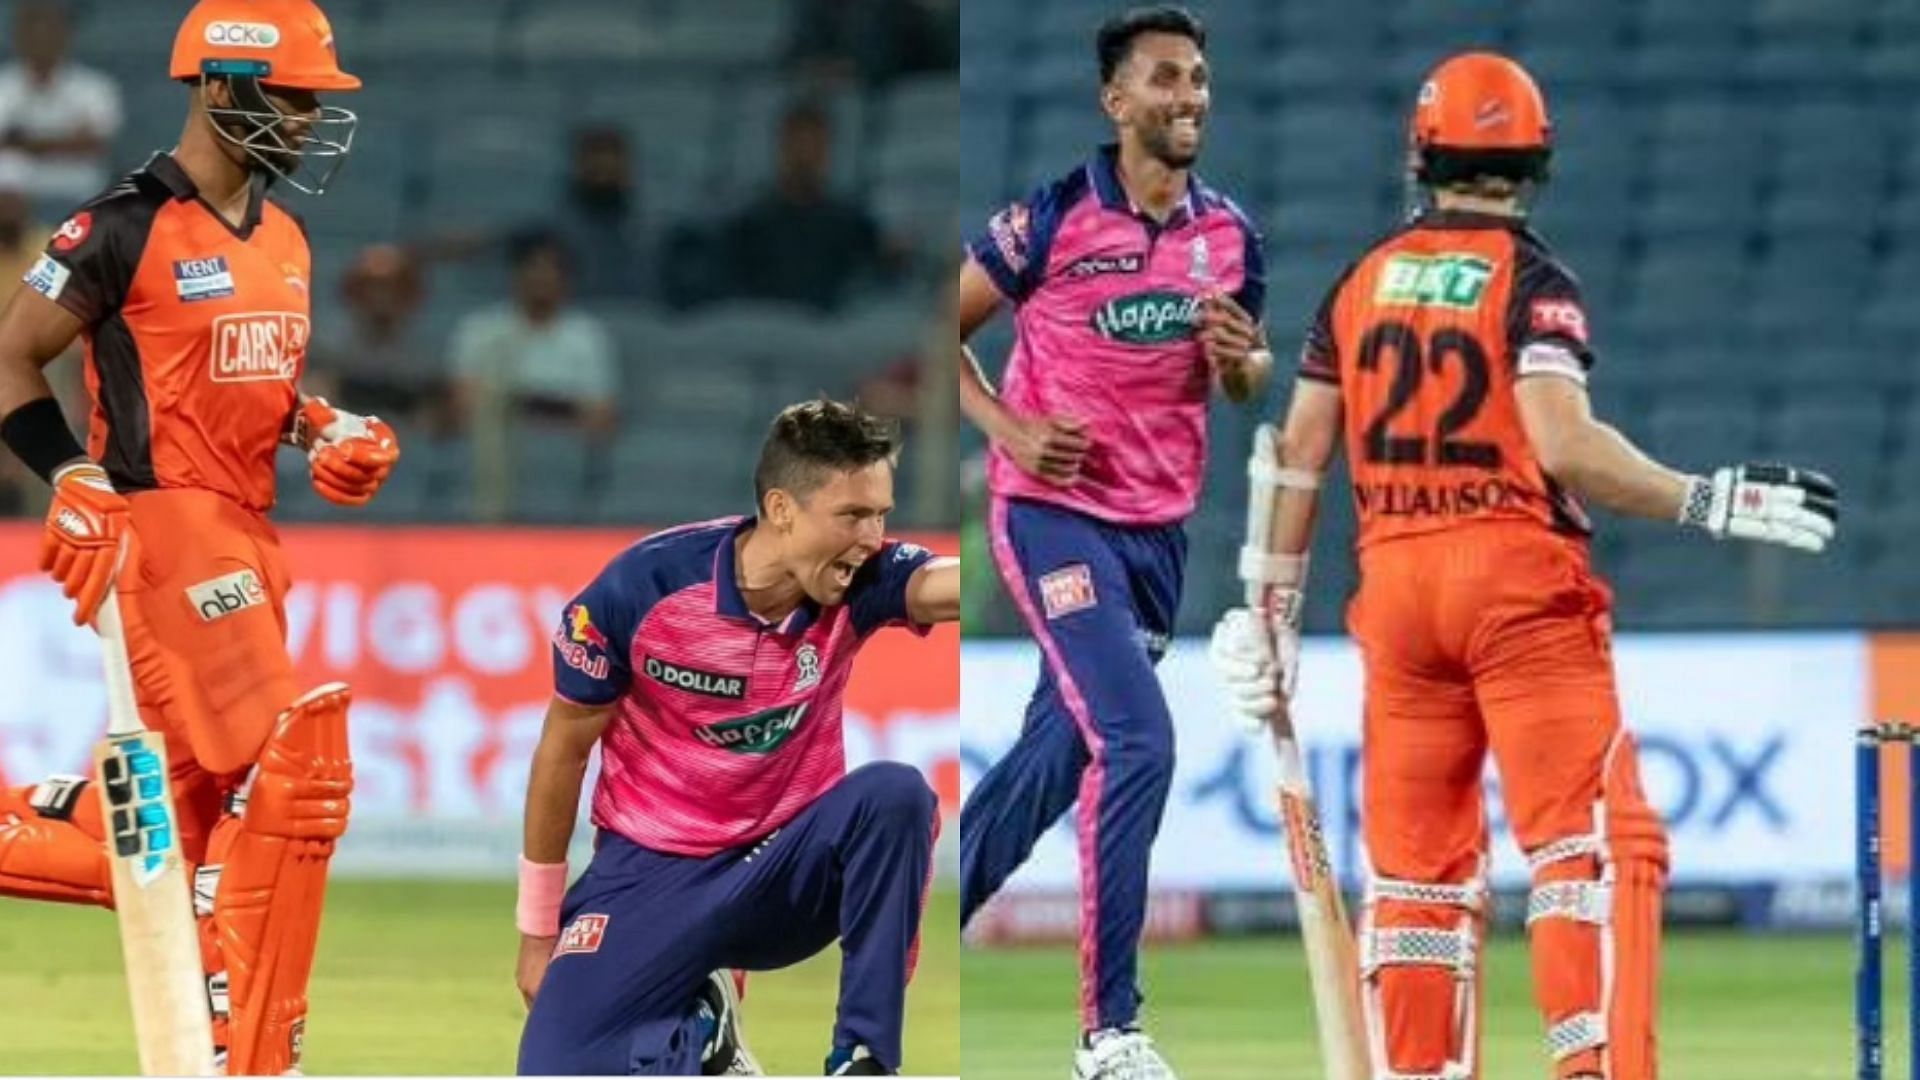 Wasim Jaffer feels SRH made some tactical blunders in their opening game. (P.C.:iplt20.com)